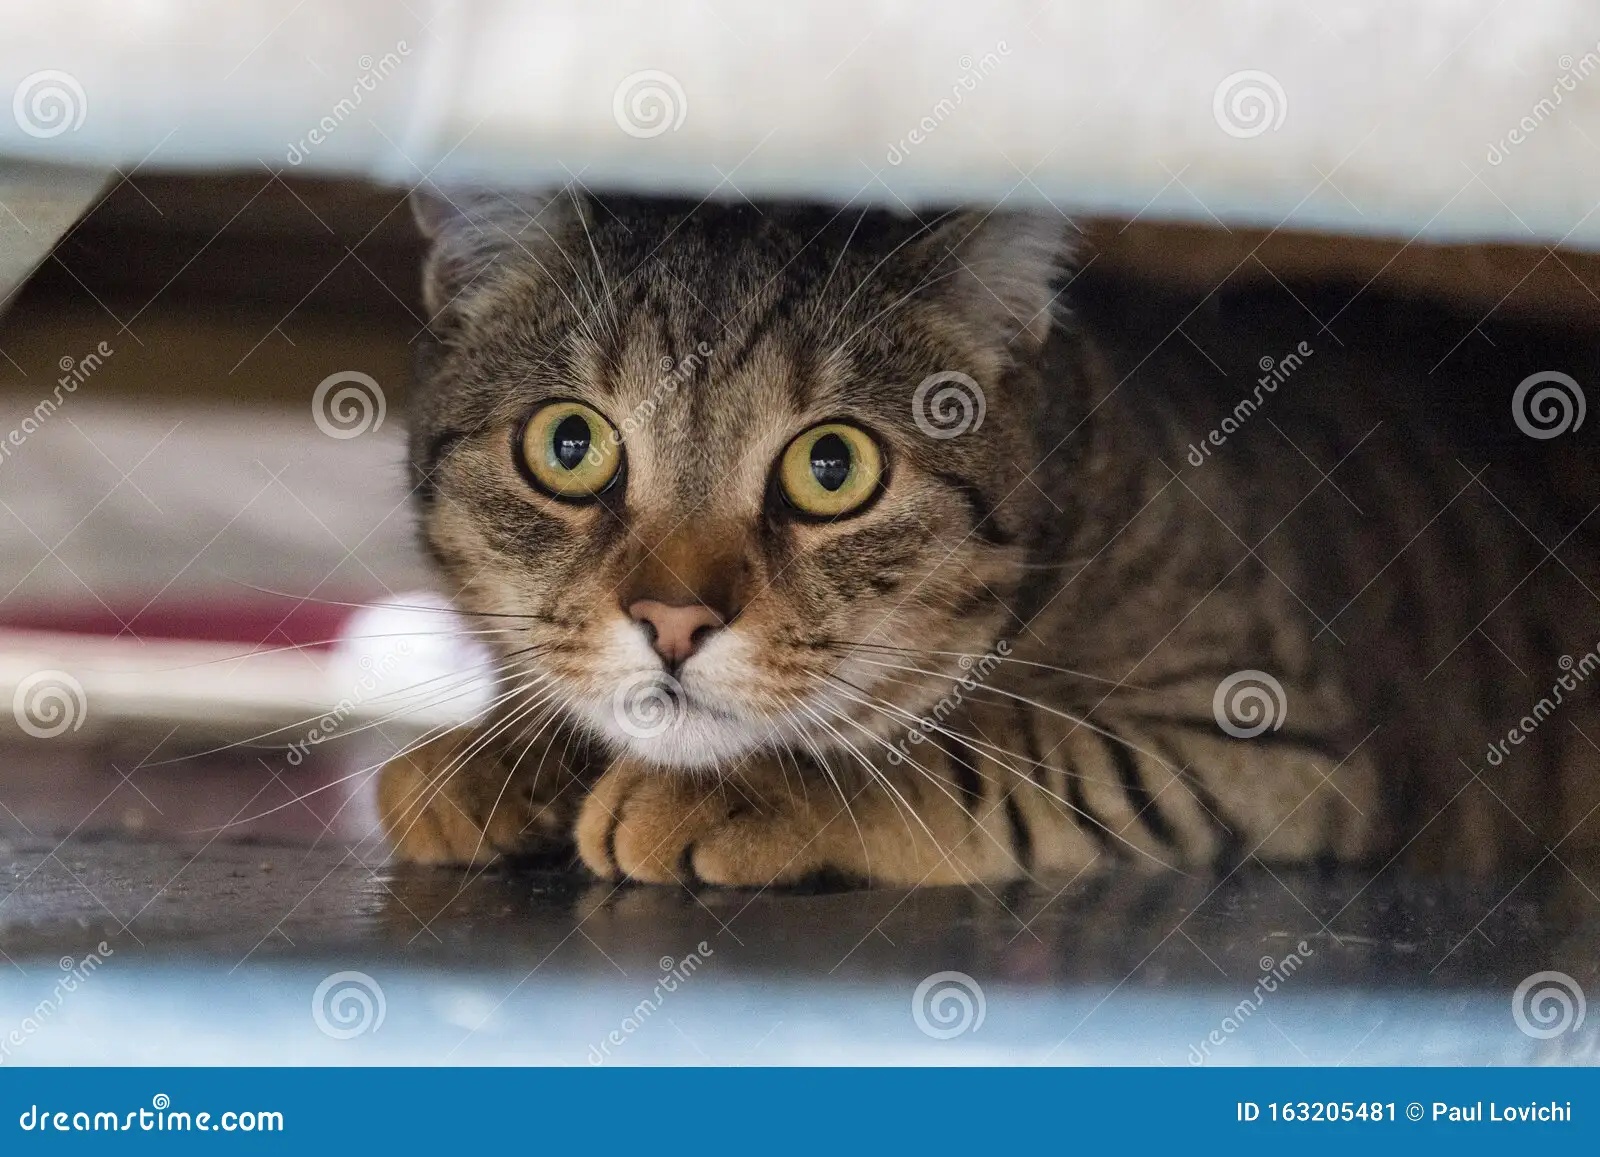 Cat hiding under a chair looking scared